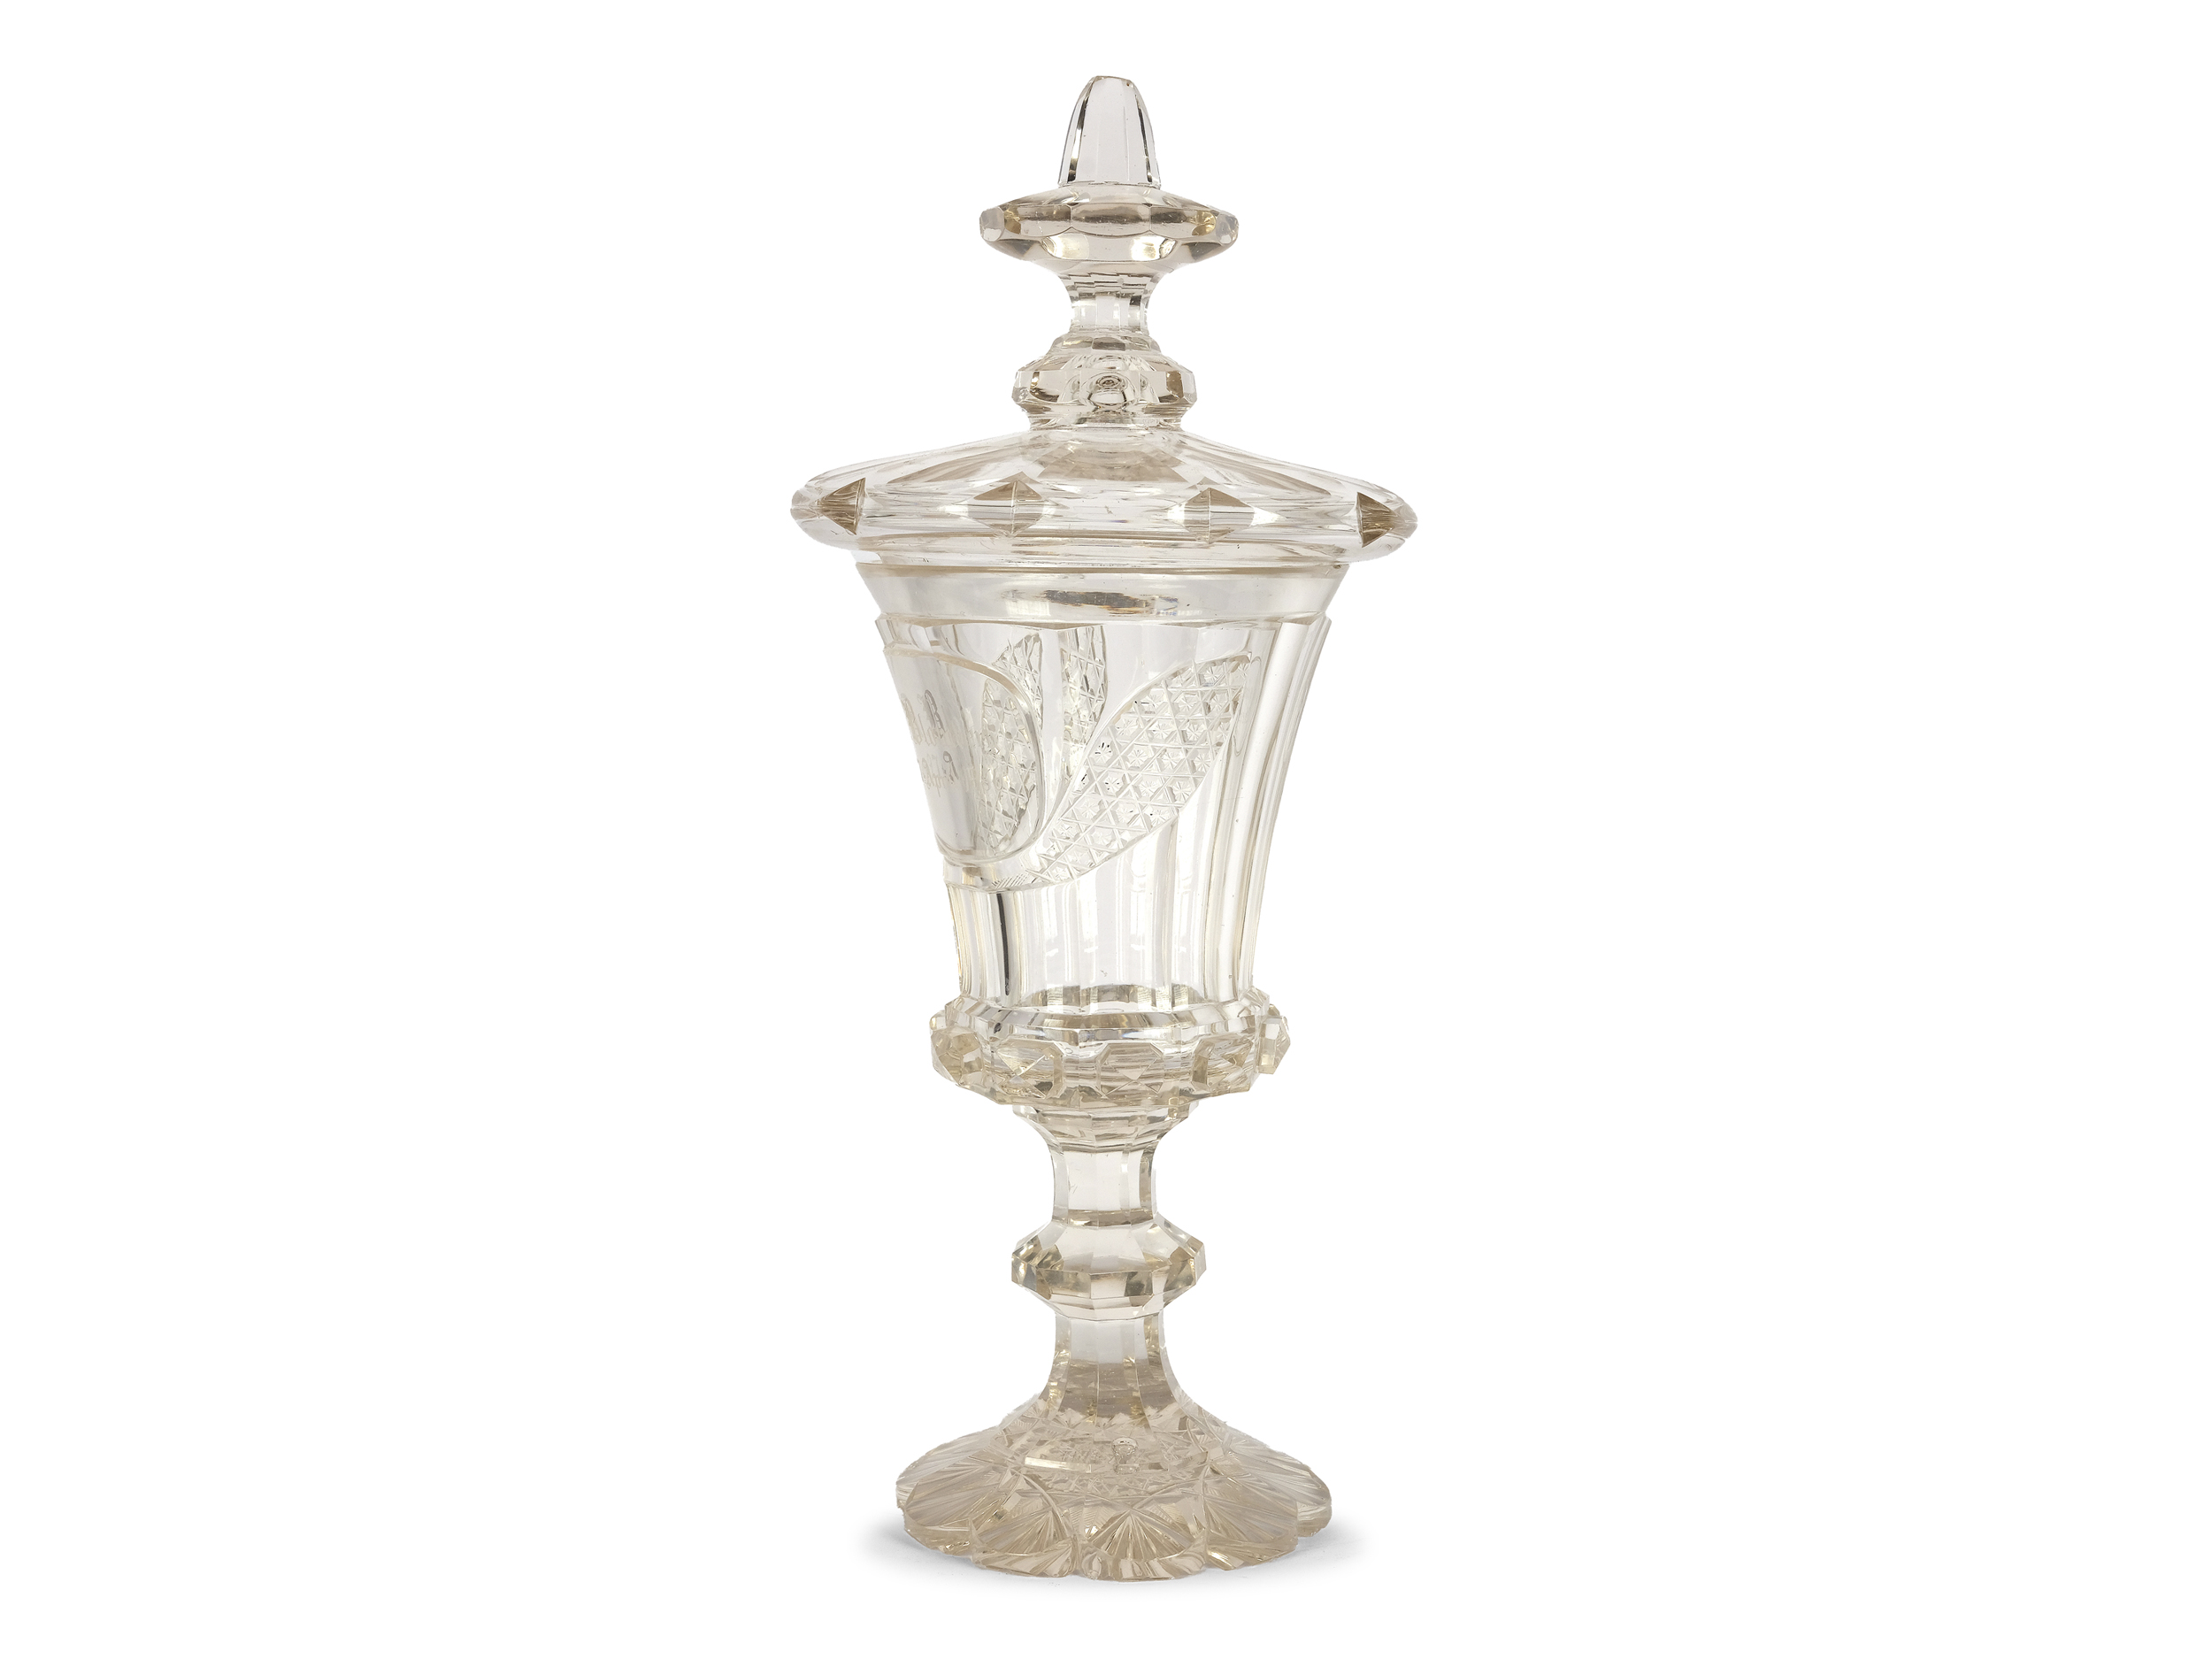 Lidded goblet, mid 19th century - Image 3 of 8